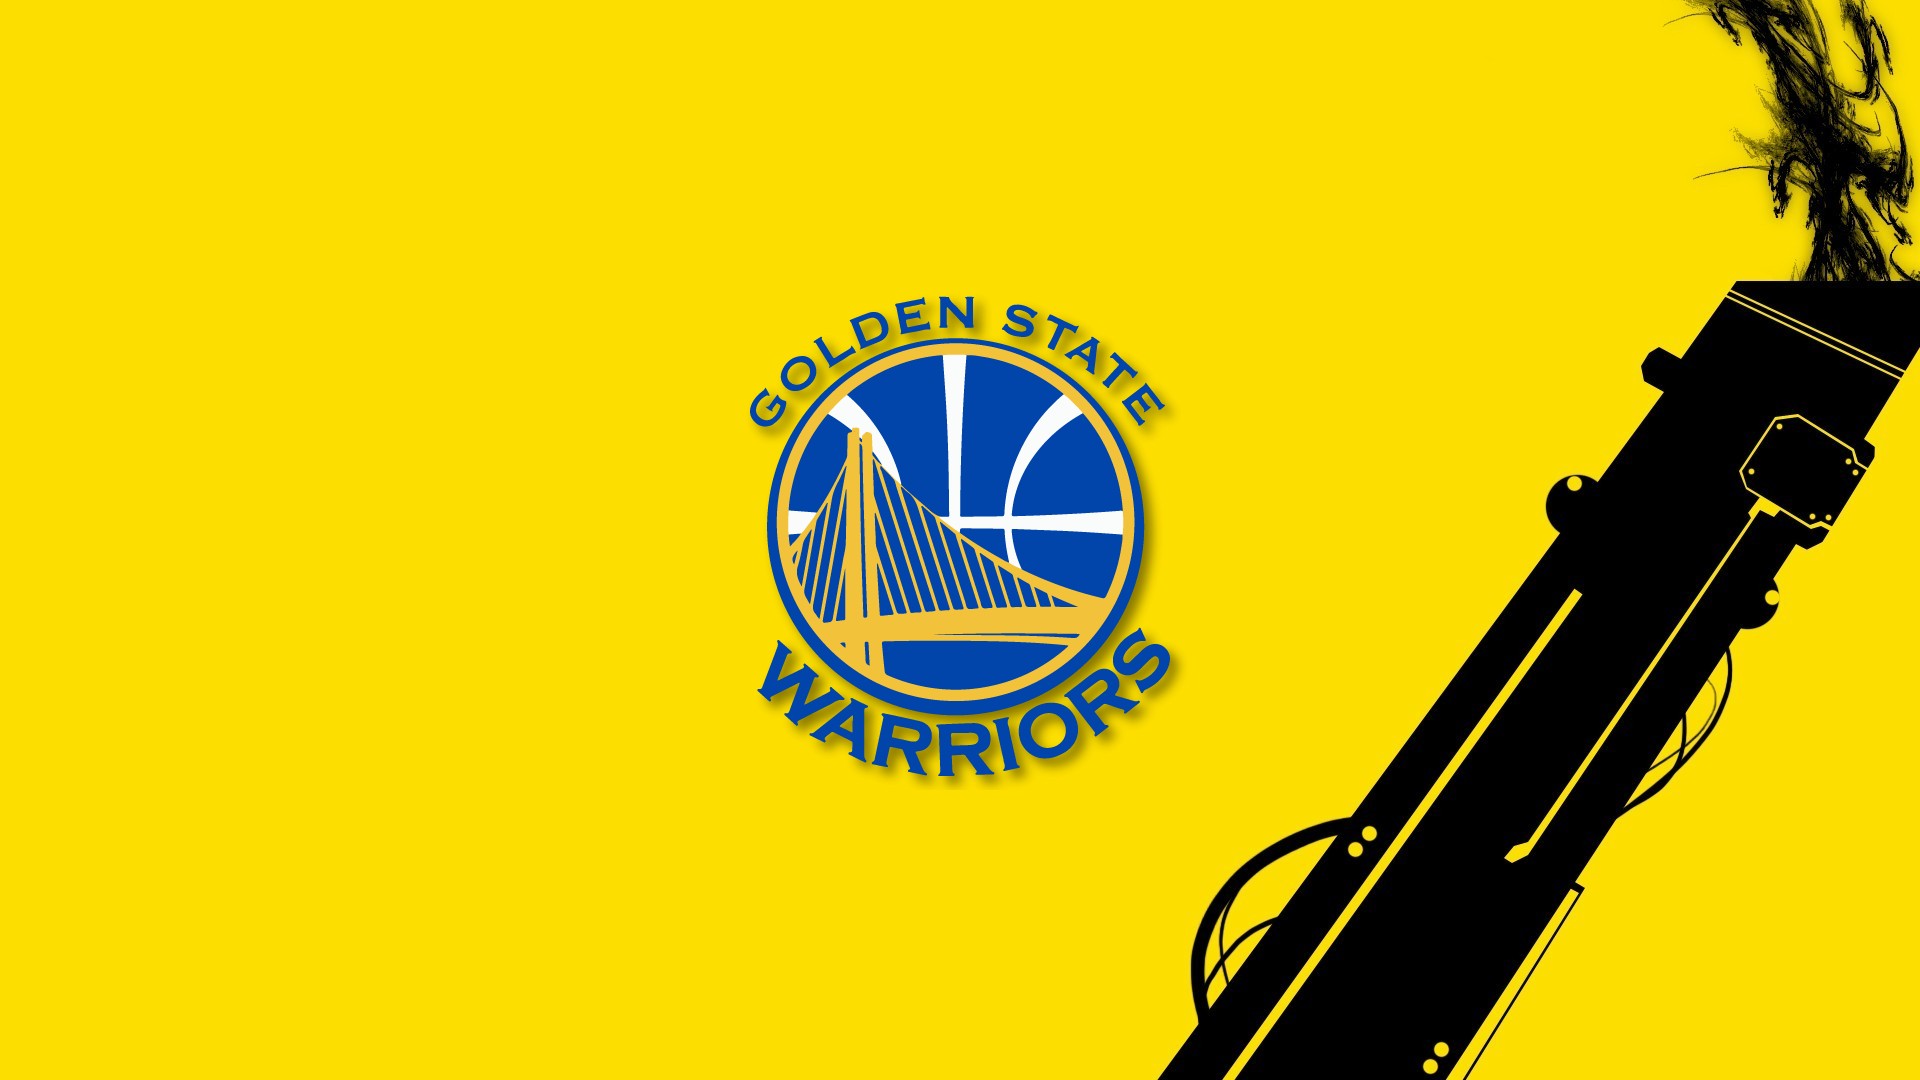 Cool Golden State Warriors Wallpaper HD with image resolution 1920x1080 pixel. You can make this wallpaper for your Desktop Computer Backgrounds, Mac Wallpapers, Android Lock screen or iPhone Screensavers